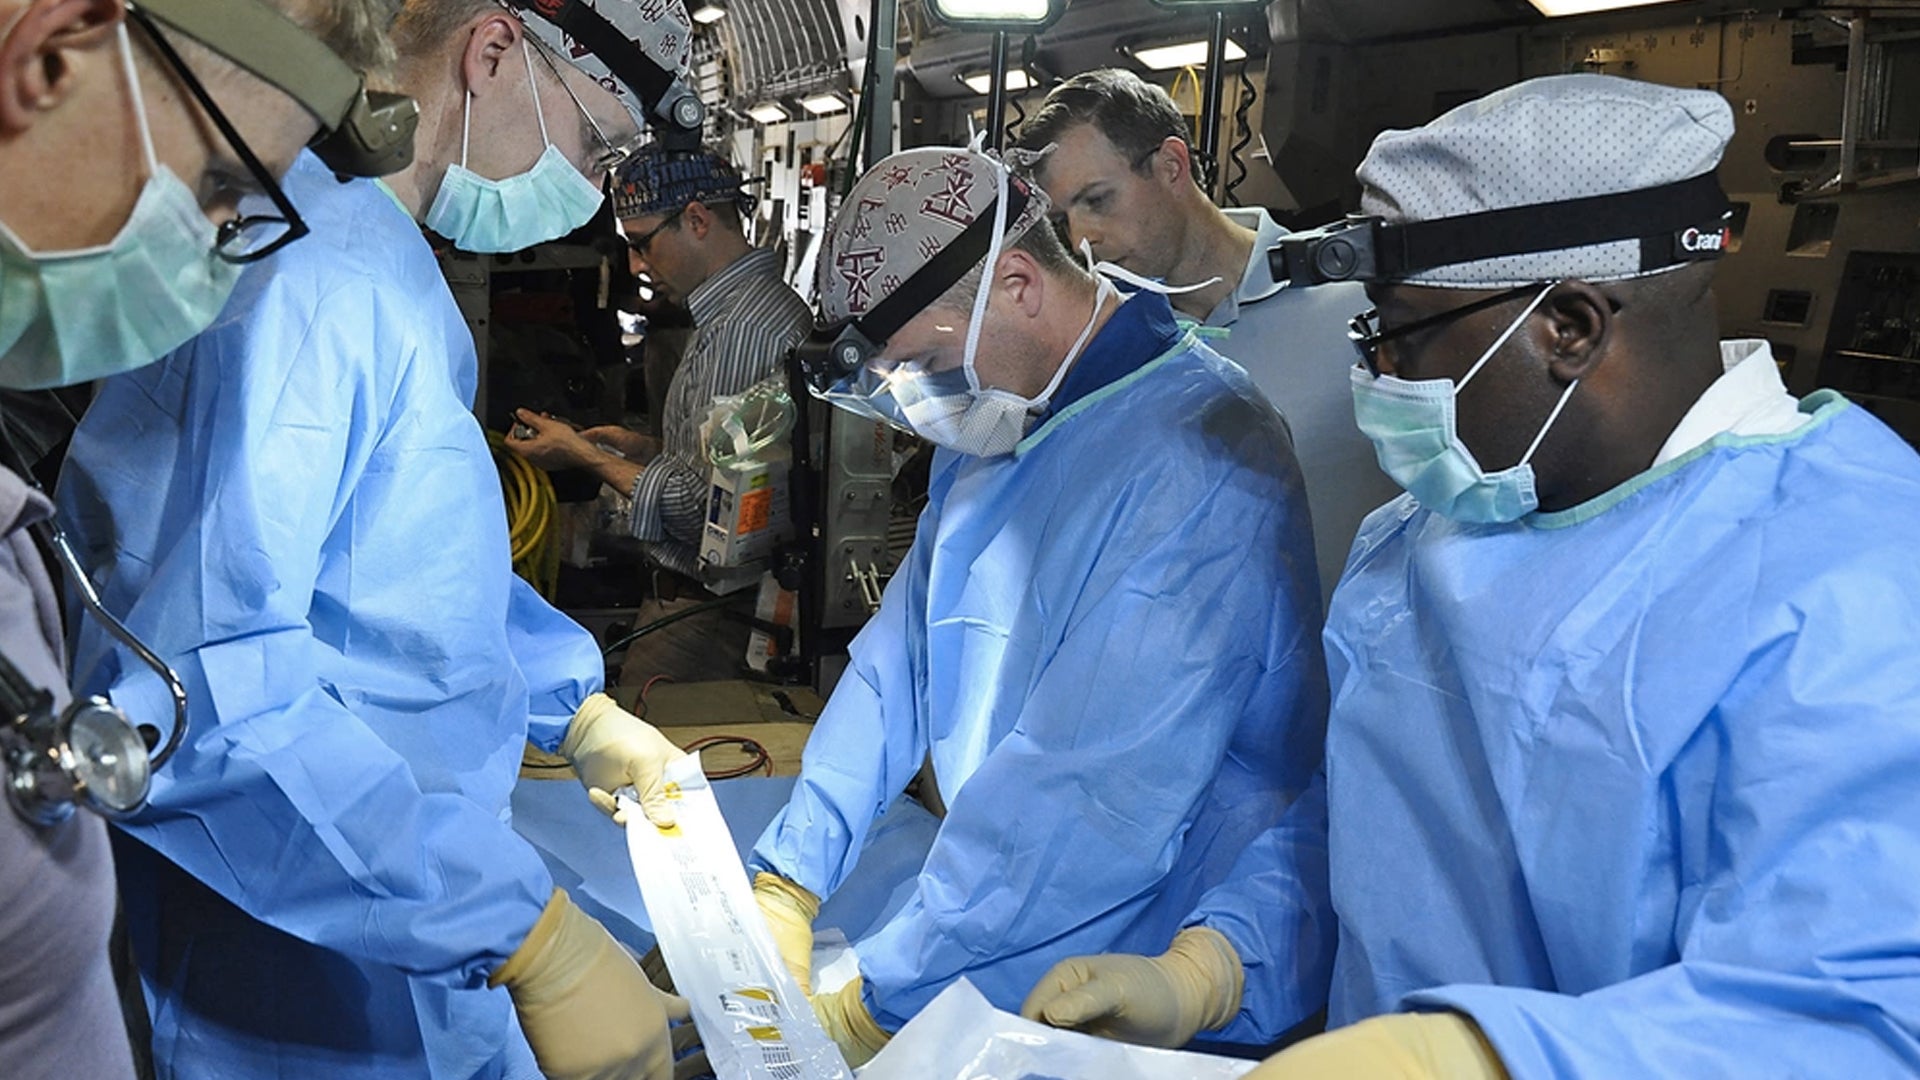 A medical crew from 59 Medical Wing at Joint Base San Antonio Lackland, practices medical procedures on a C-17 Globemaster III during a presidential support mission to Havana, Cuba, March, 2016. (Maj. Wayne Capps/U.S. Air Force)